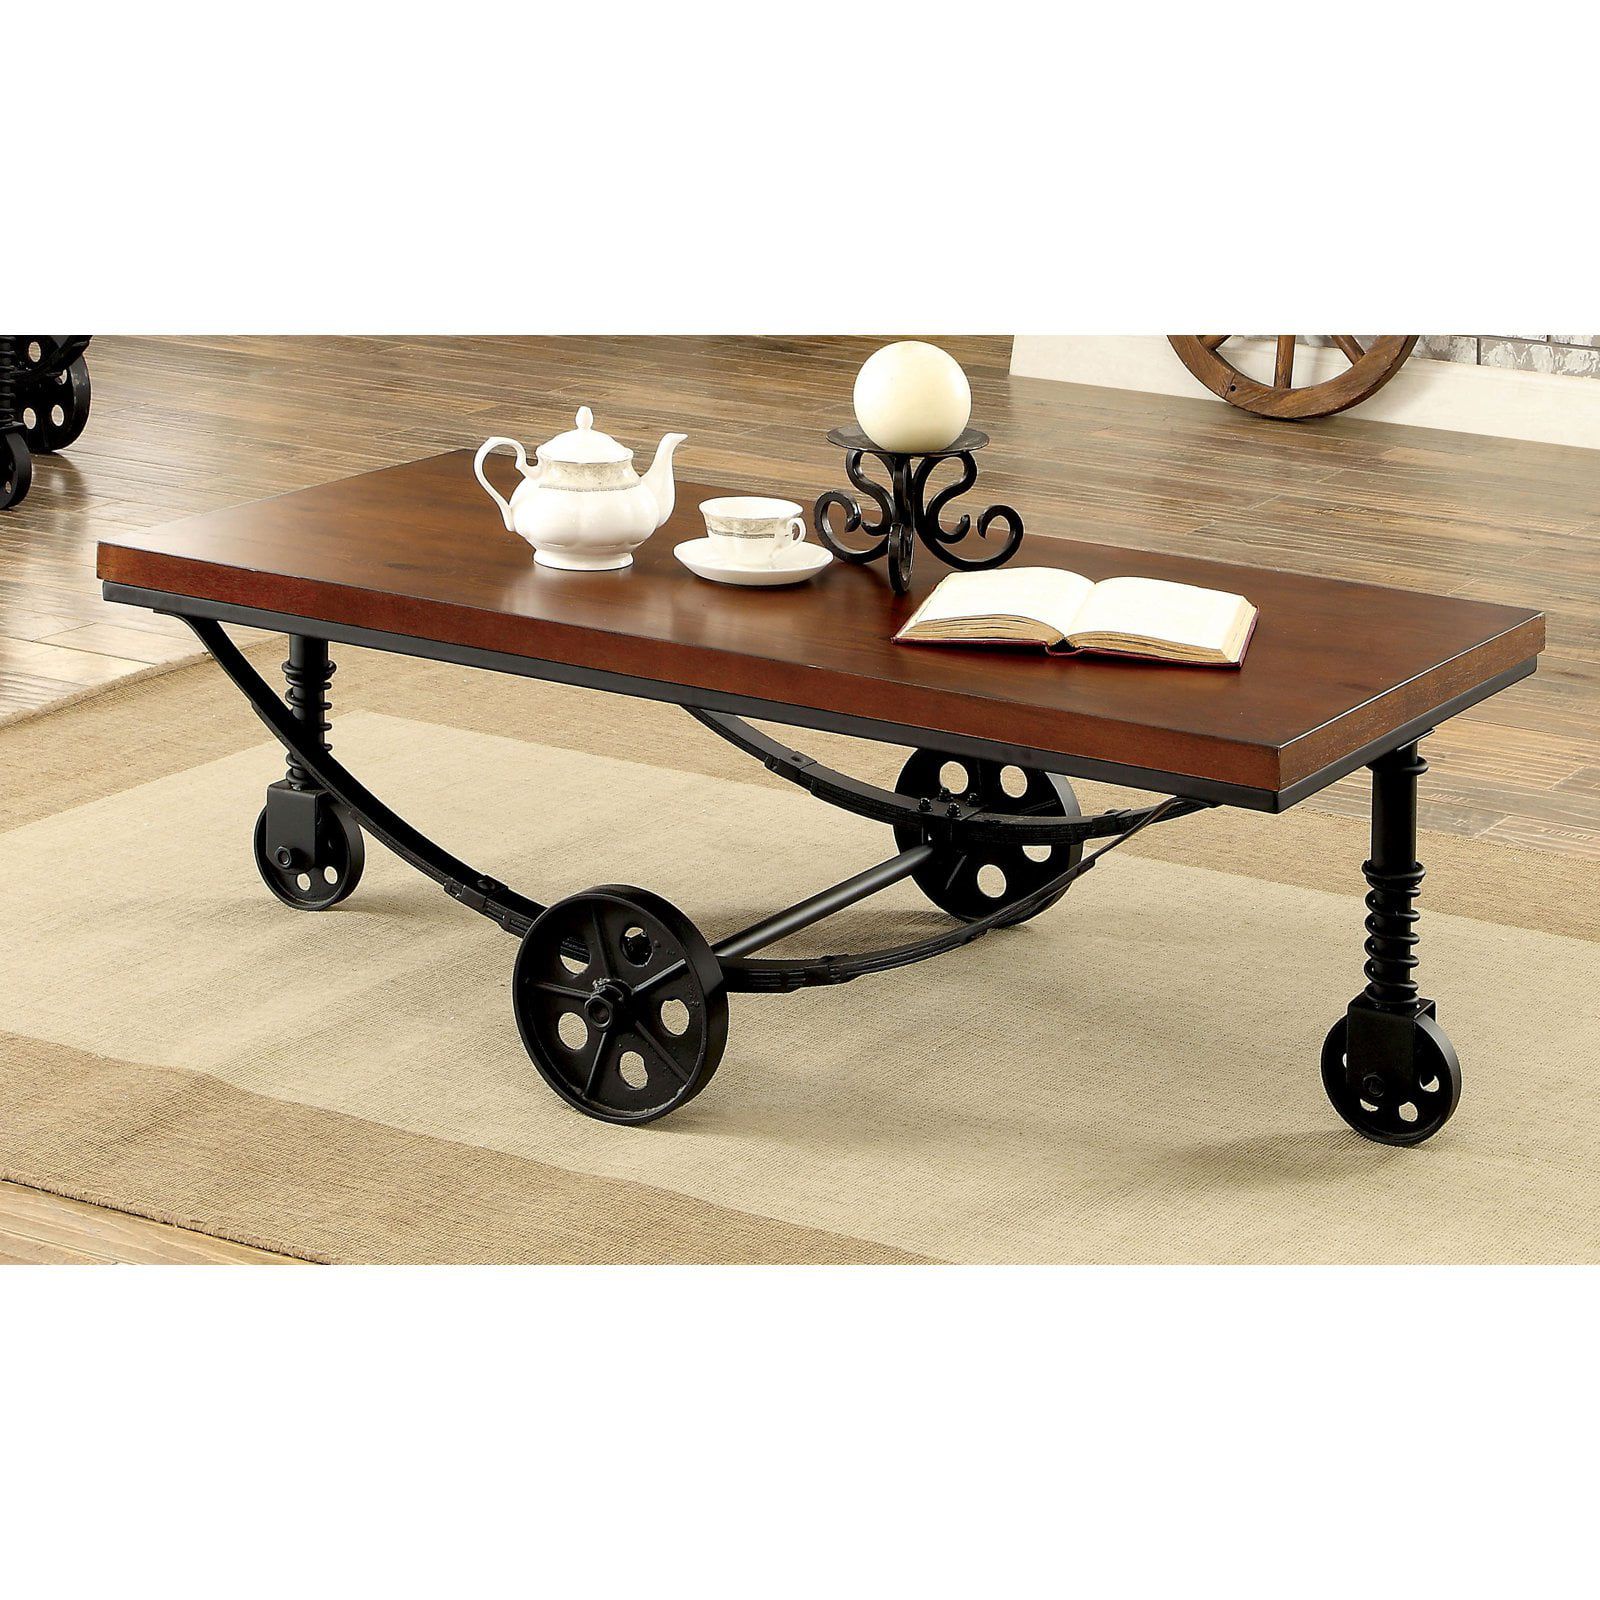 Furniture Of America Mator Industrial Style Caster Wheel Coffee Table With Coffee Tables With Casters (Gallery 3 of 20)